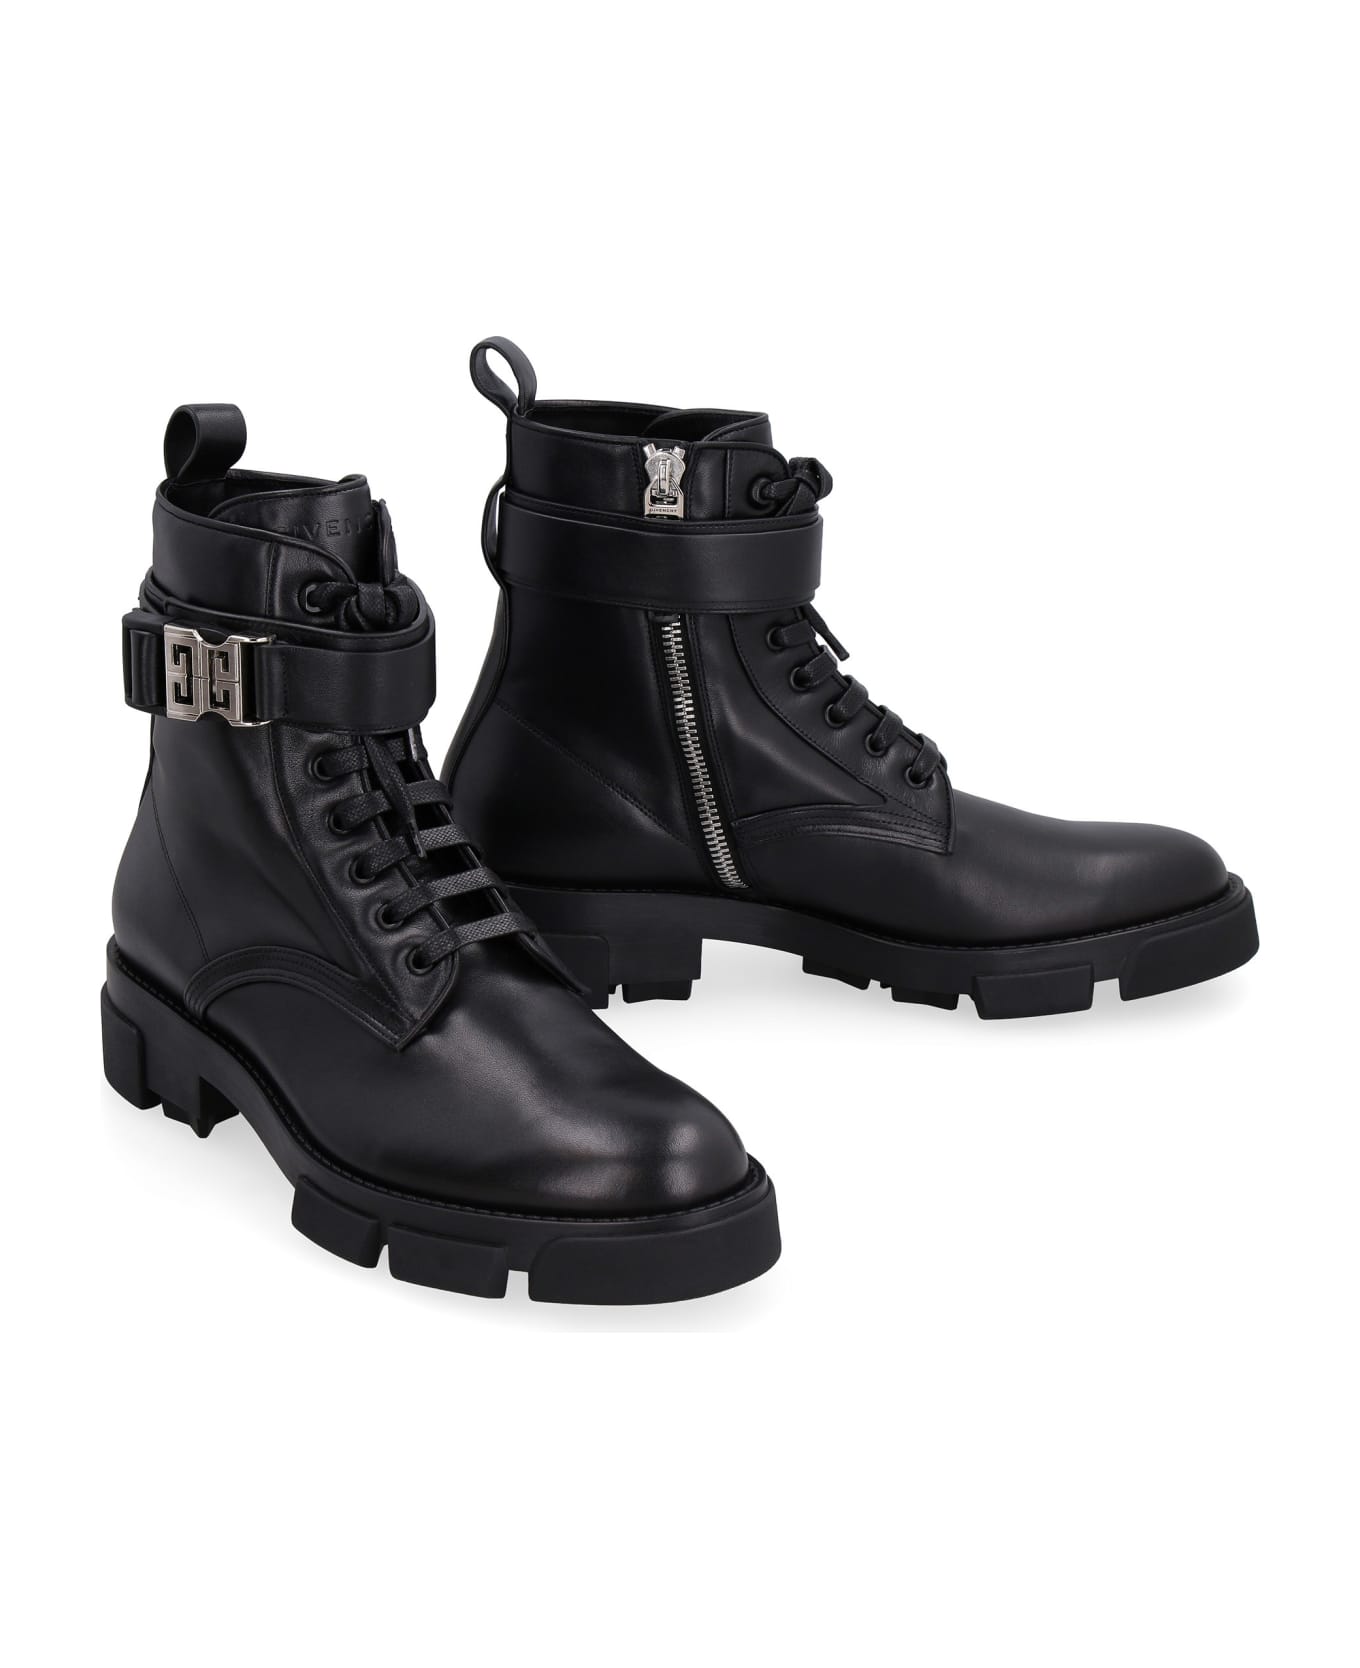 Givenchy Terra Leather Ankle Boots - BLACK ブーツ